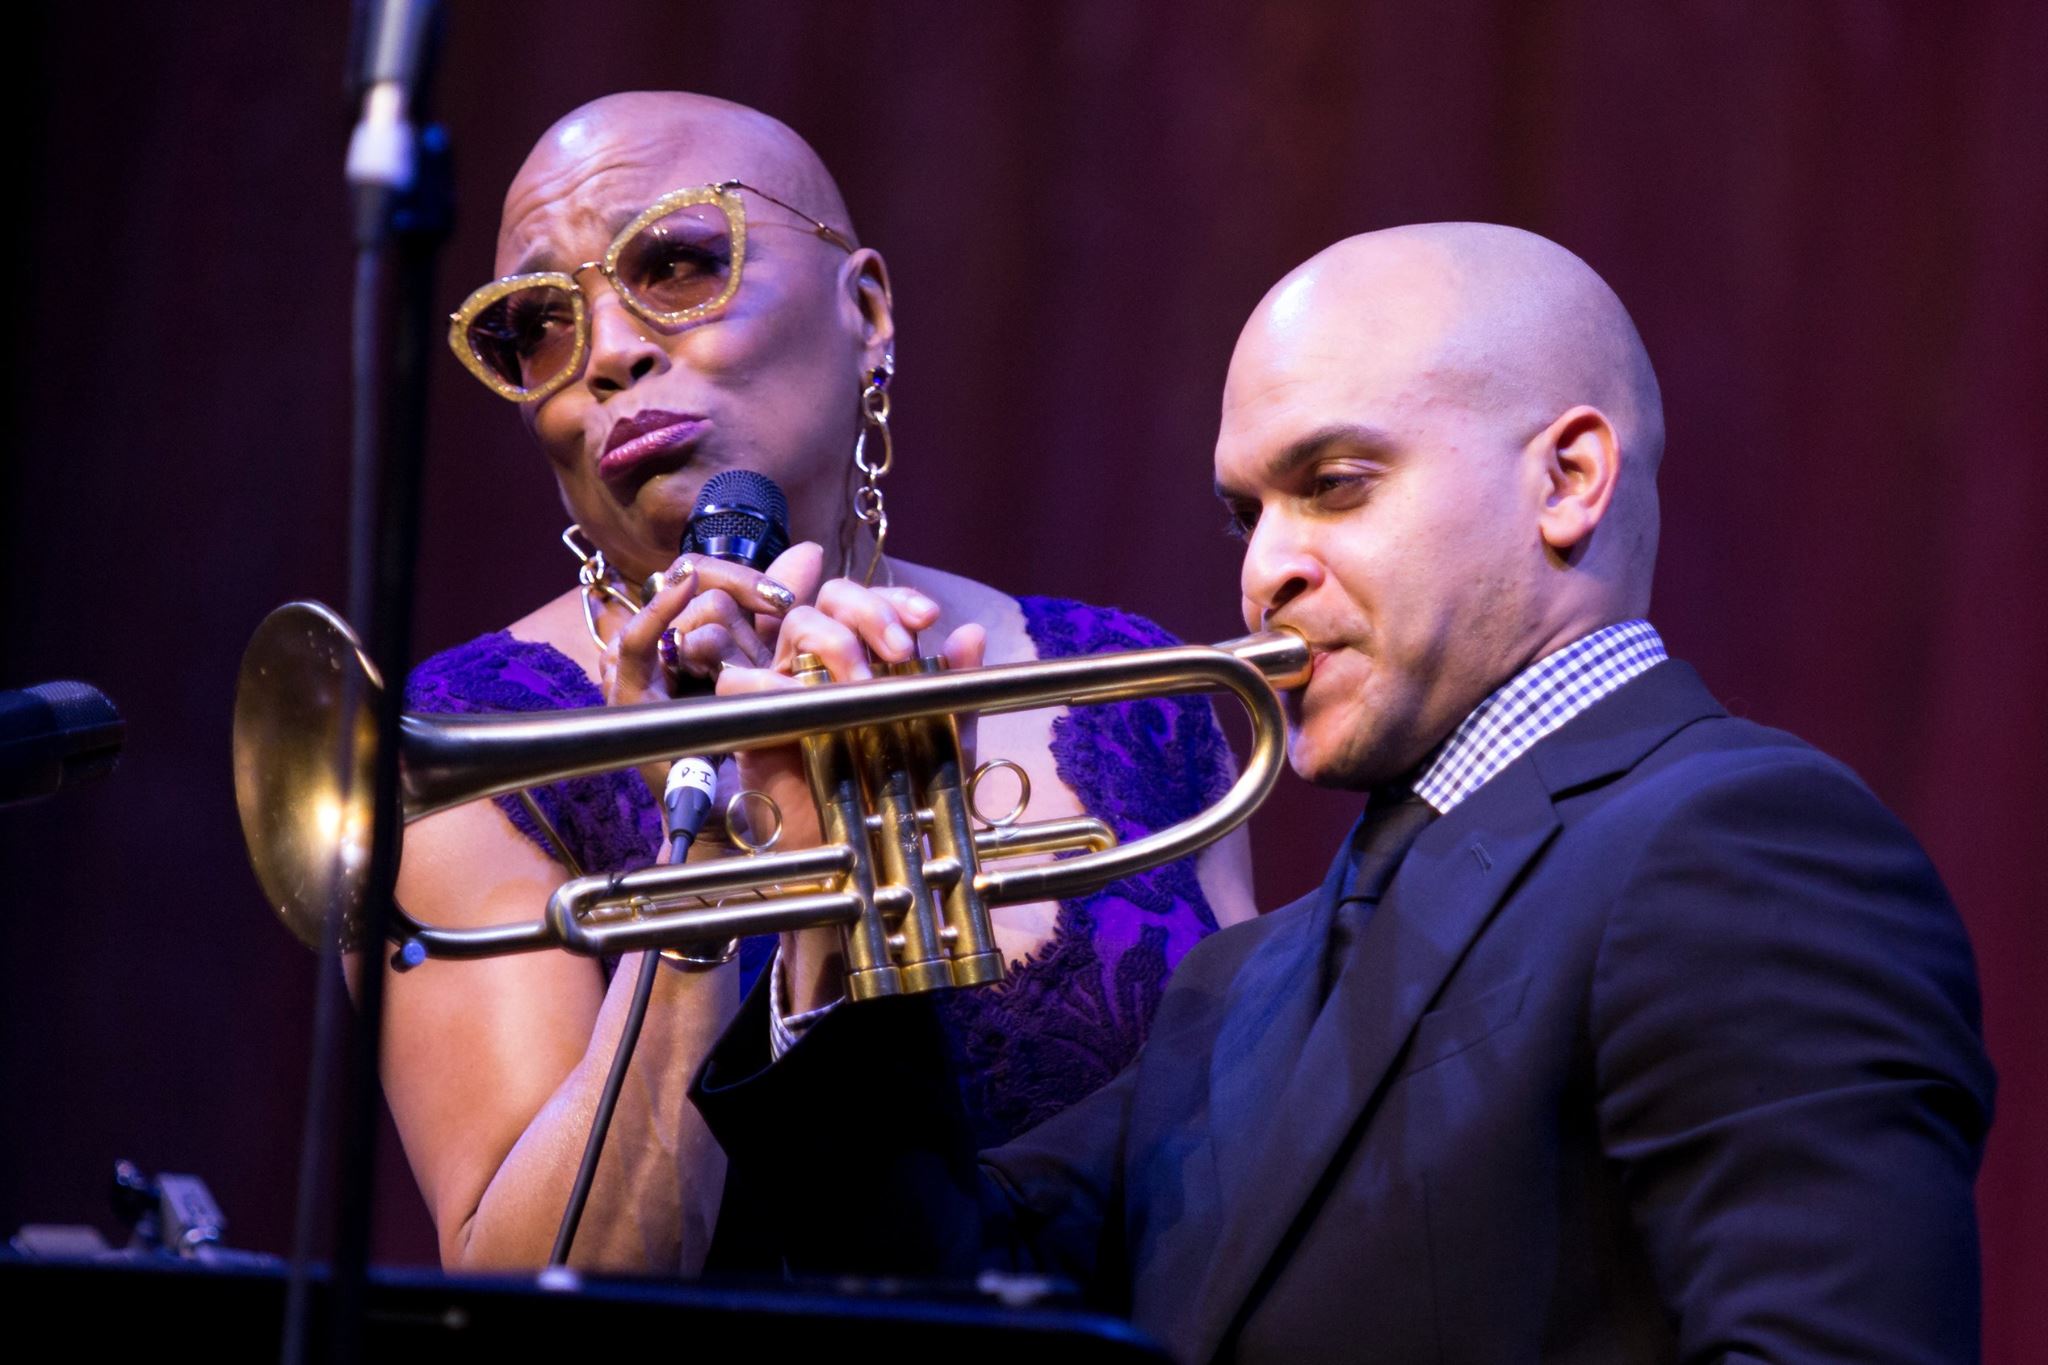 DEE DEE BRIDGEWATER, IRVIN MAYFIELD & THE NEW ORLEANS JAZZ ORCHESTRA  BROUGHT DOWN THE HOUSE TO CLOSE OUT THIS YEARS MELBOURNE INT’L JAZZ FESTIVAL IN AUSTRALIA